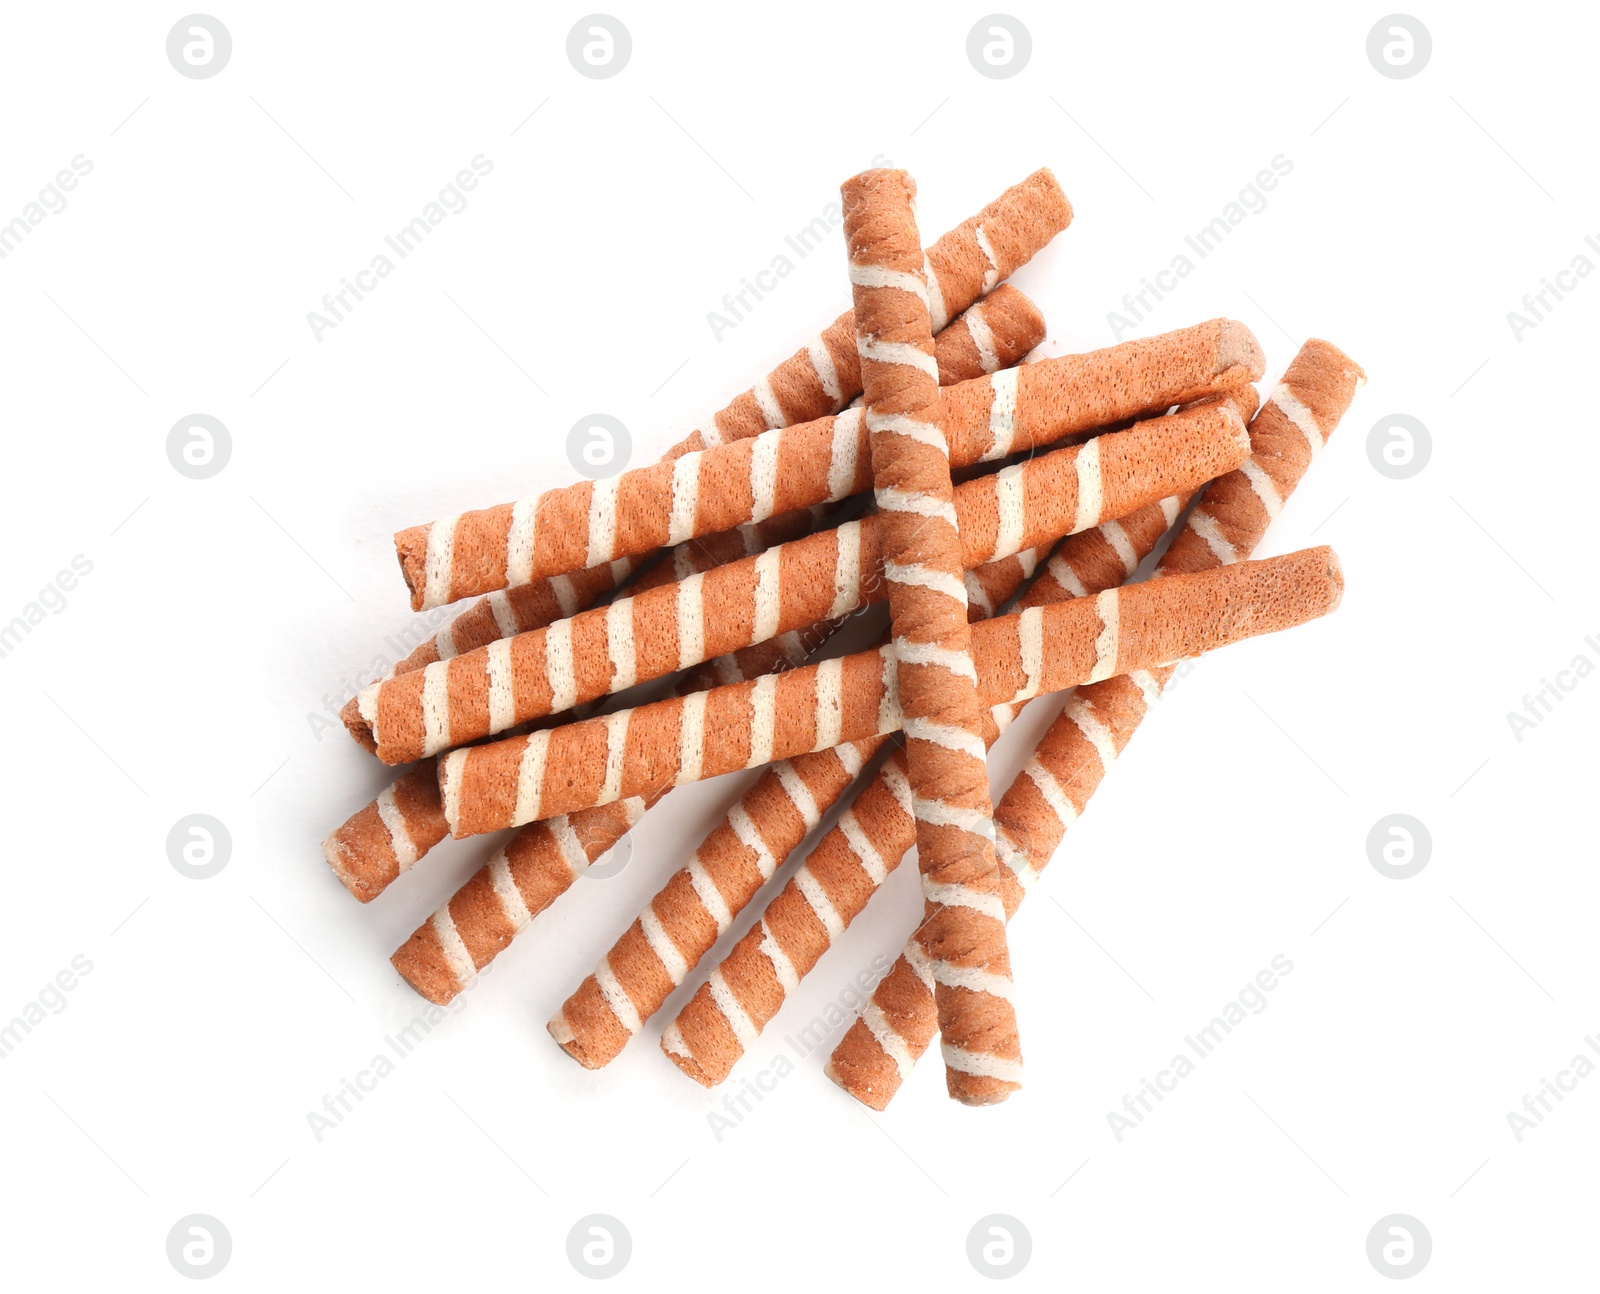 Photo of Delicious chocolate wafer rolls on white background, top view. Sweet food